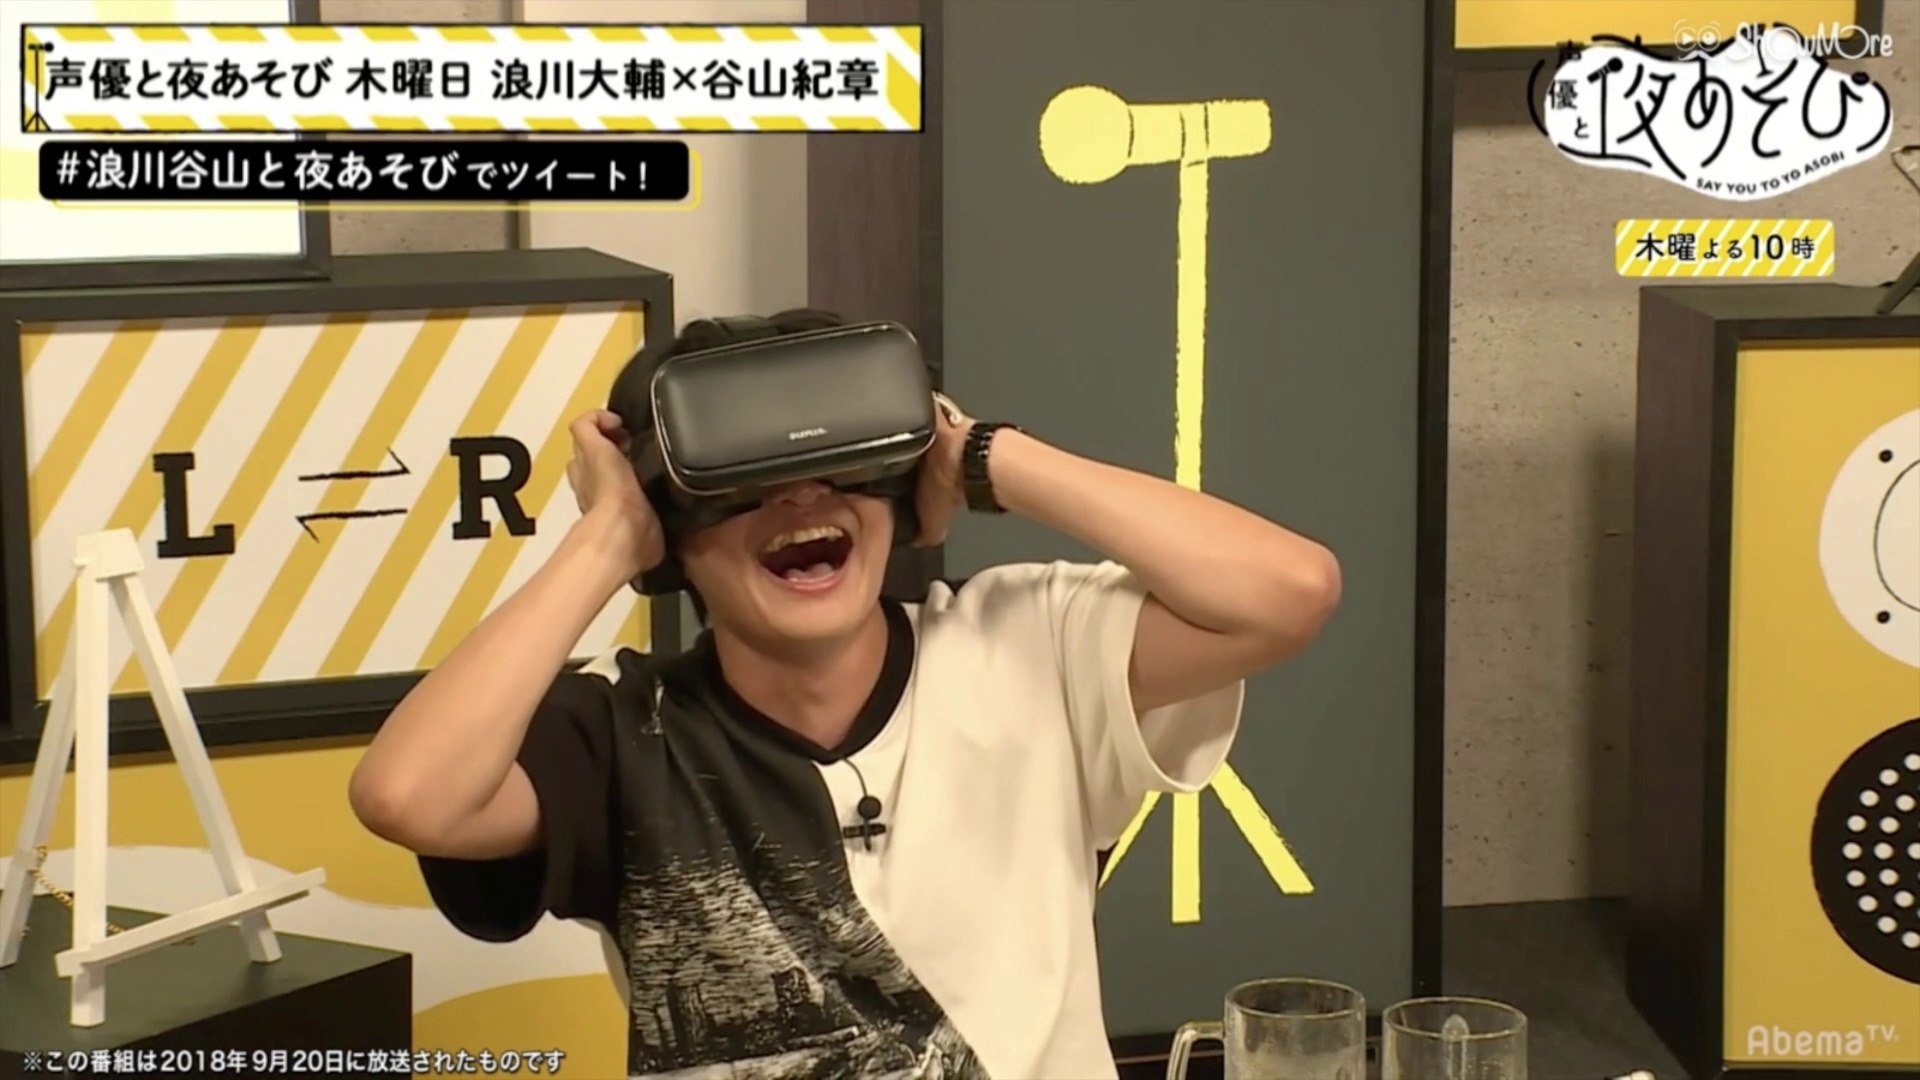 ⁣Shimono Hiro watches a VR adult video while everyone else secretly leaves the room